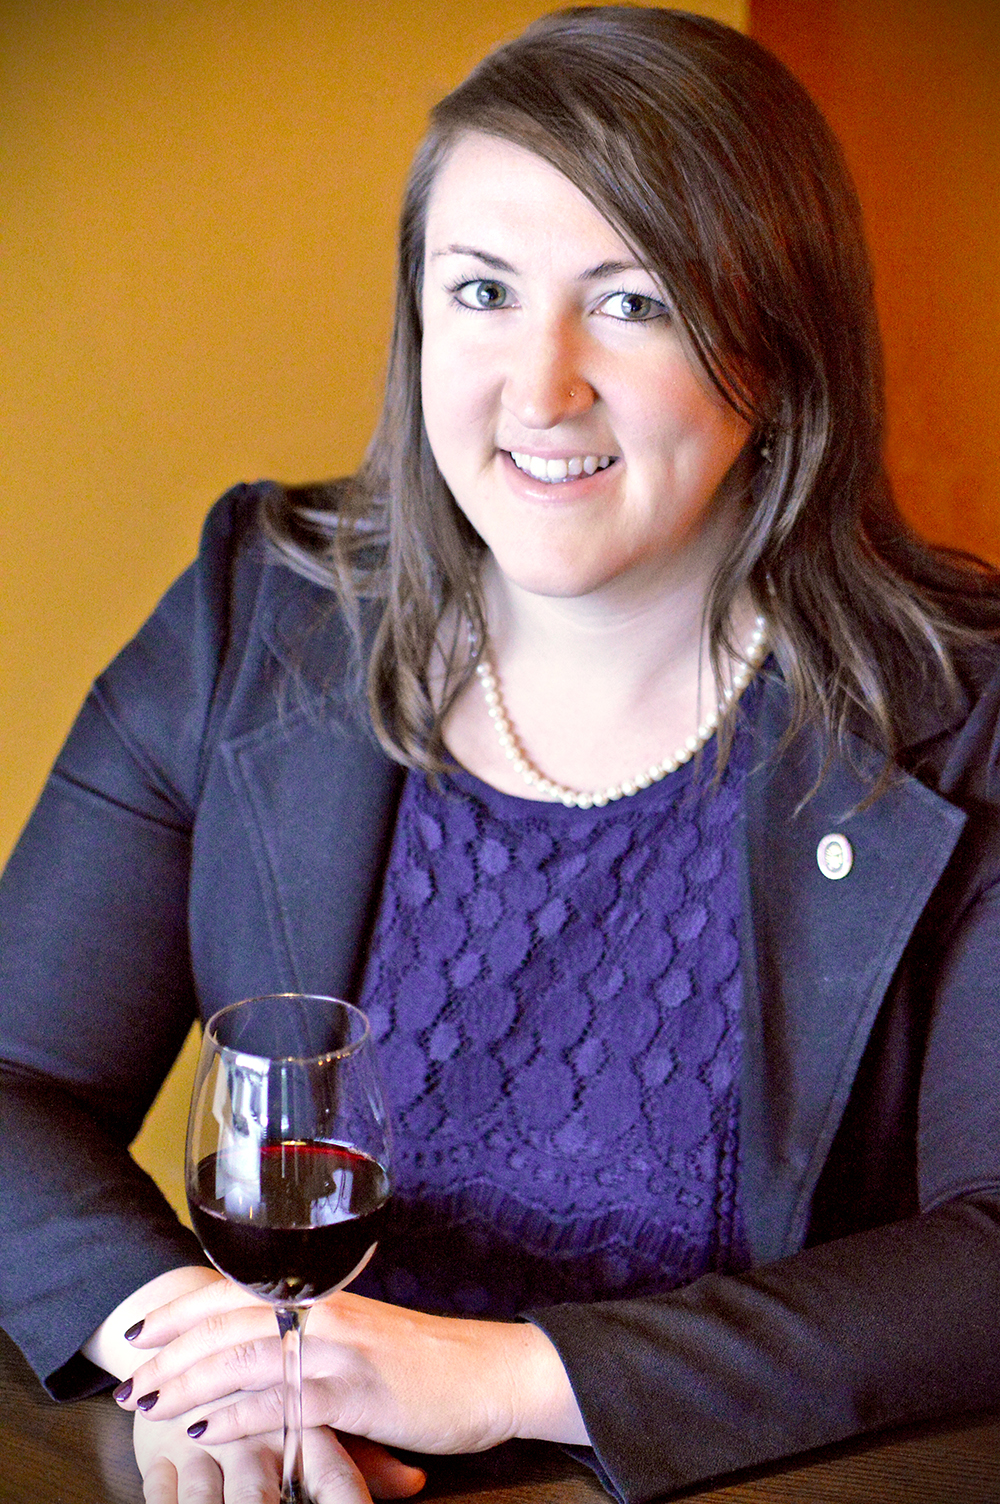 Headshot of a woman with long hair wearing a blue blazer, holding a glass of wine